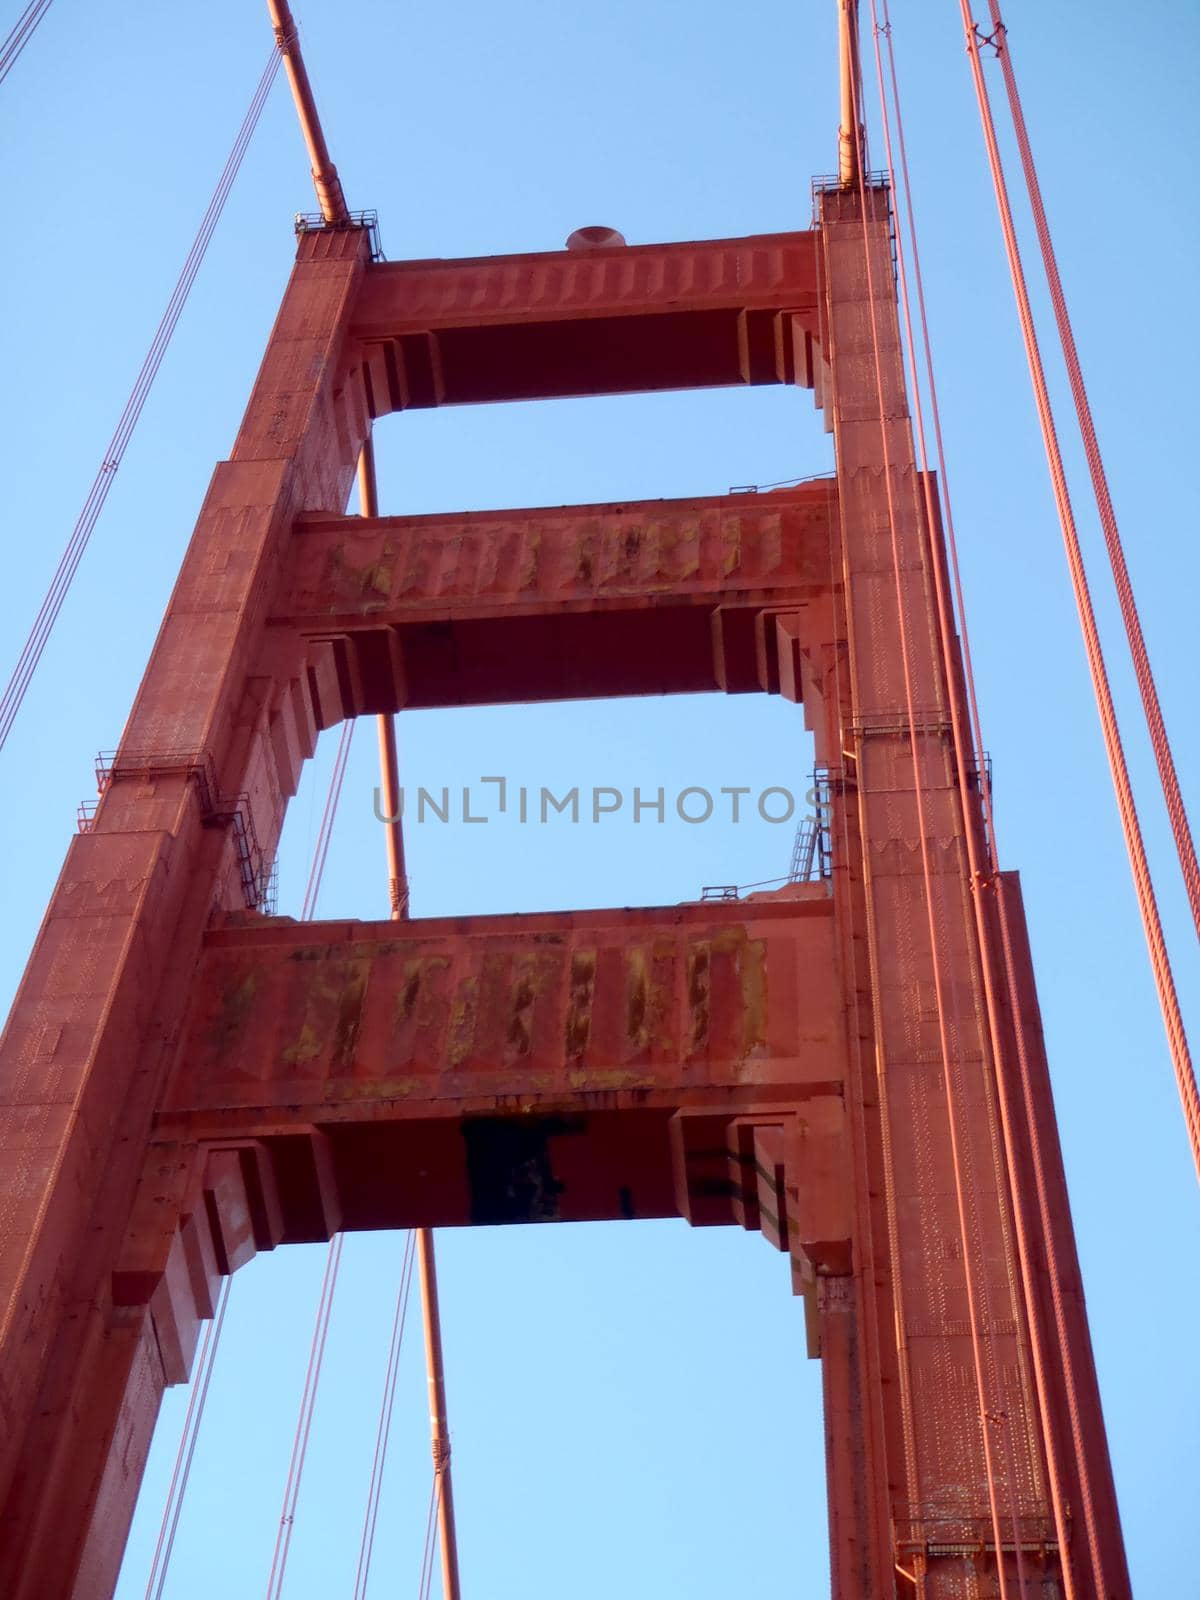 Art Deco Tower and supporting cables on the Golden Gate Bridge by EricGBVD